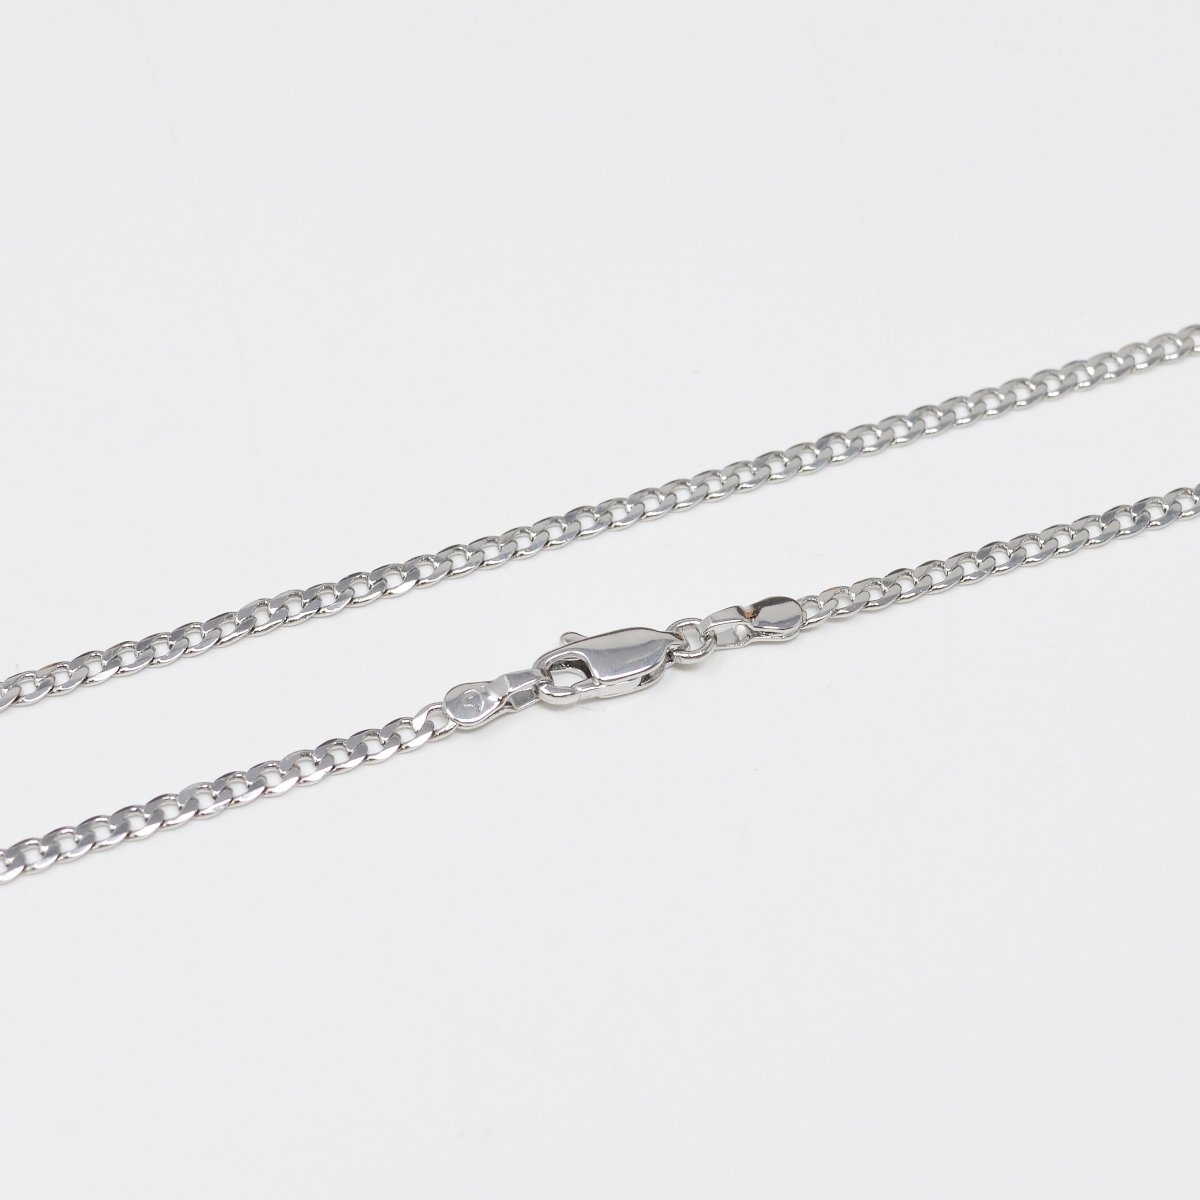 17.5 inch Silver Miami Cuban Curb Chain Necklace, White Gold Filled Curb Finished Necklace, 2.5mm Curb Necklace w/ Spring Ring | CN-1013 Clearance Pricing - DLUXCA